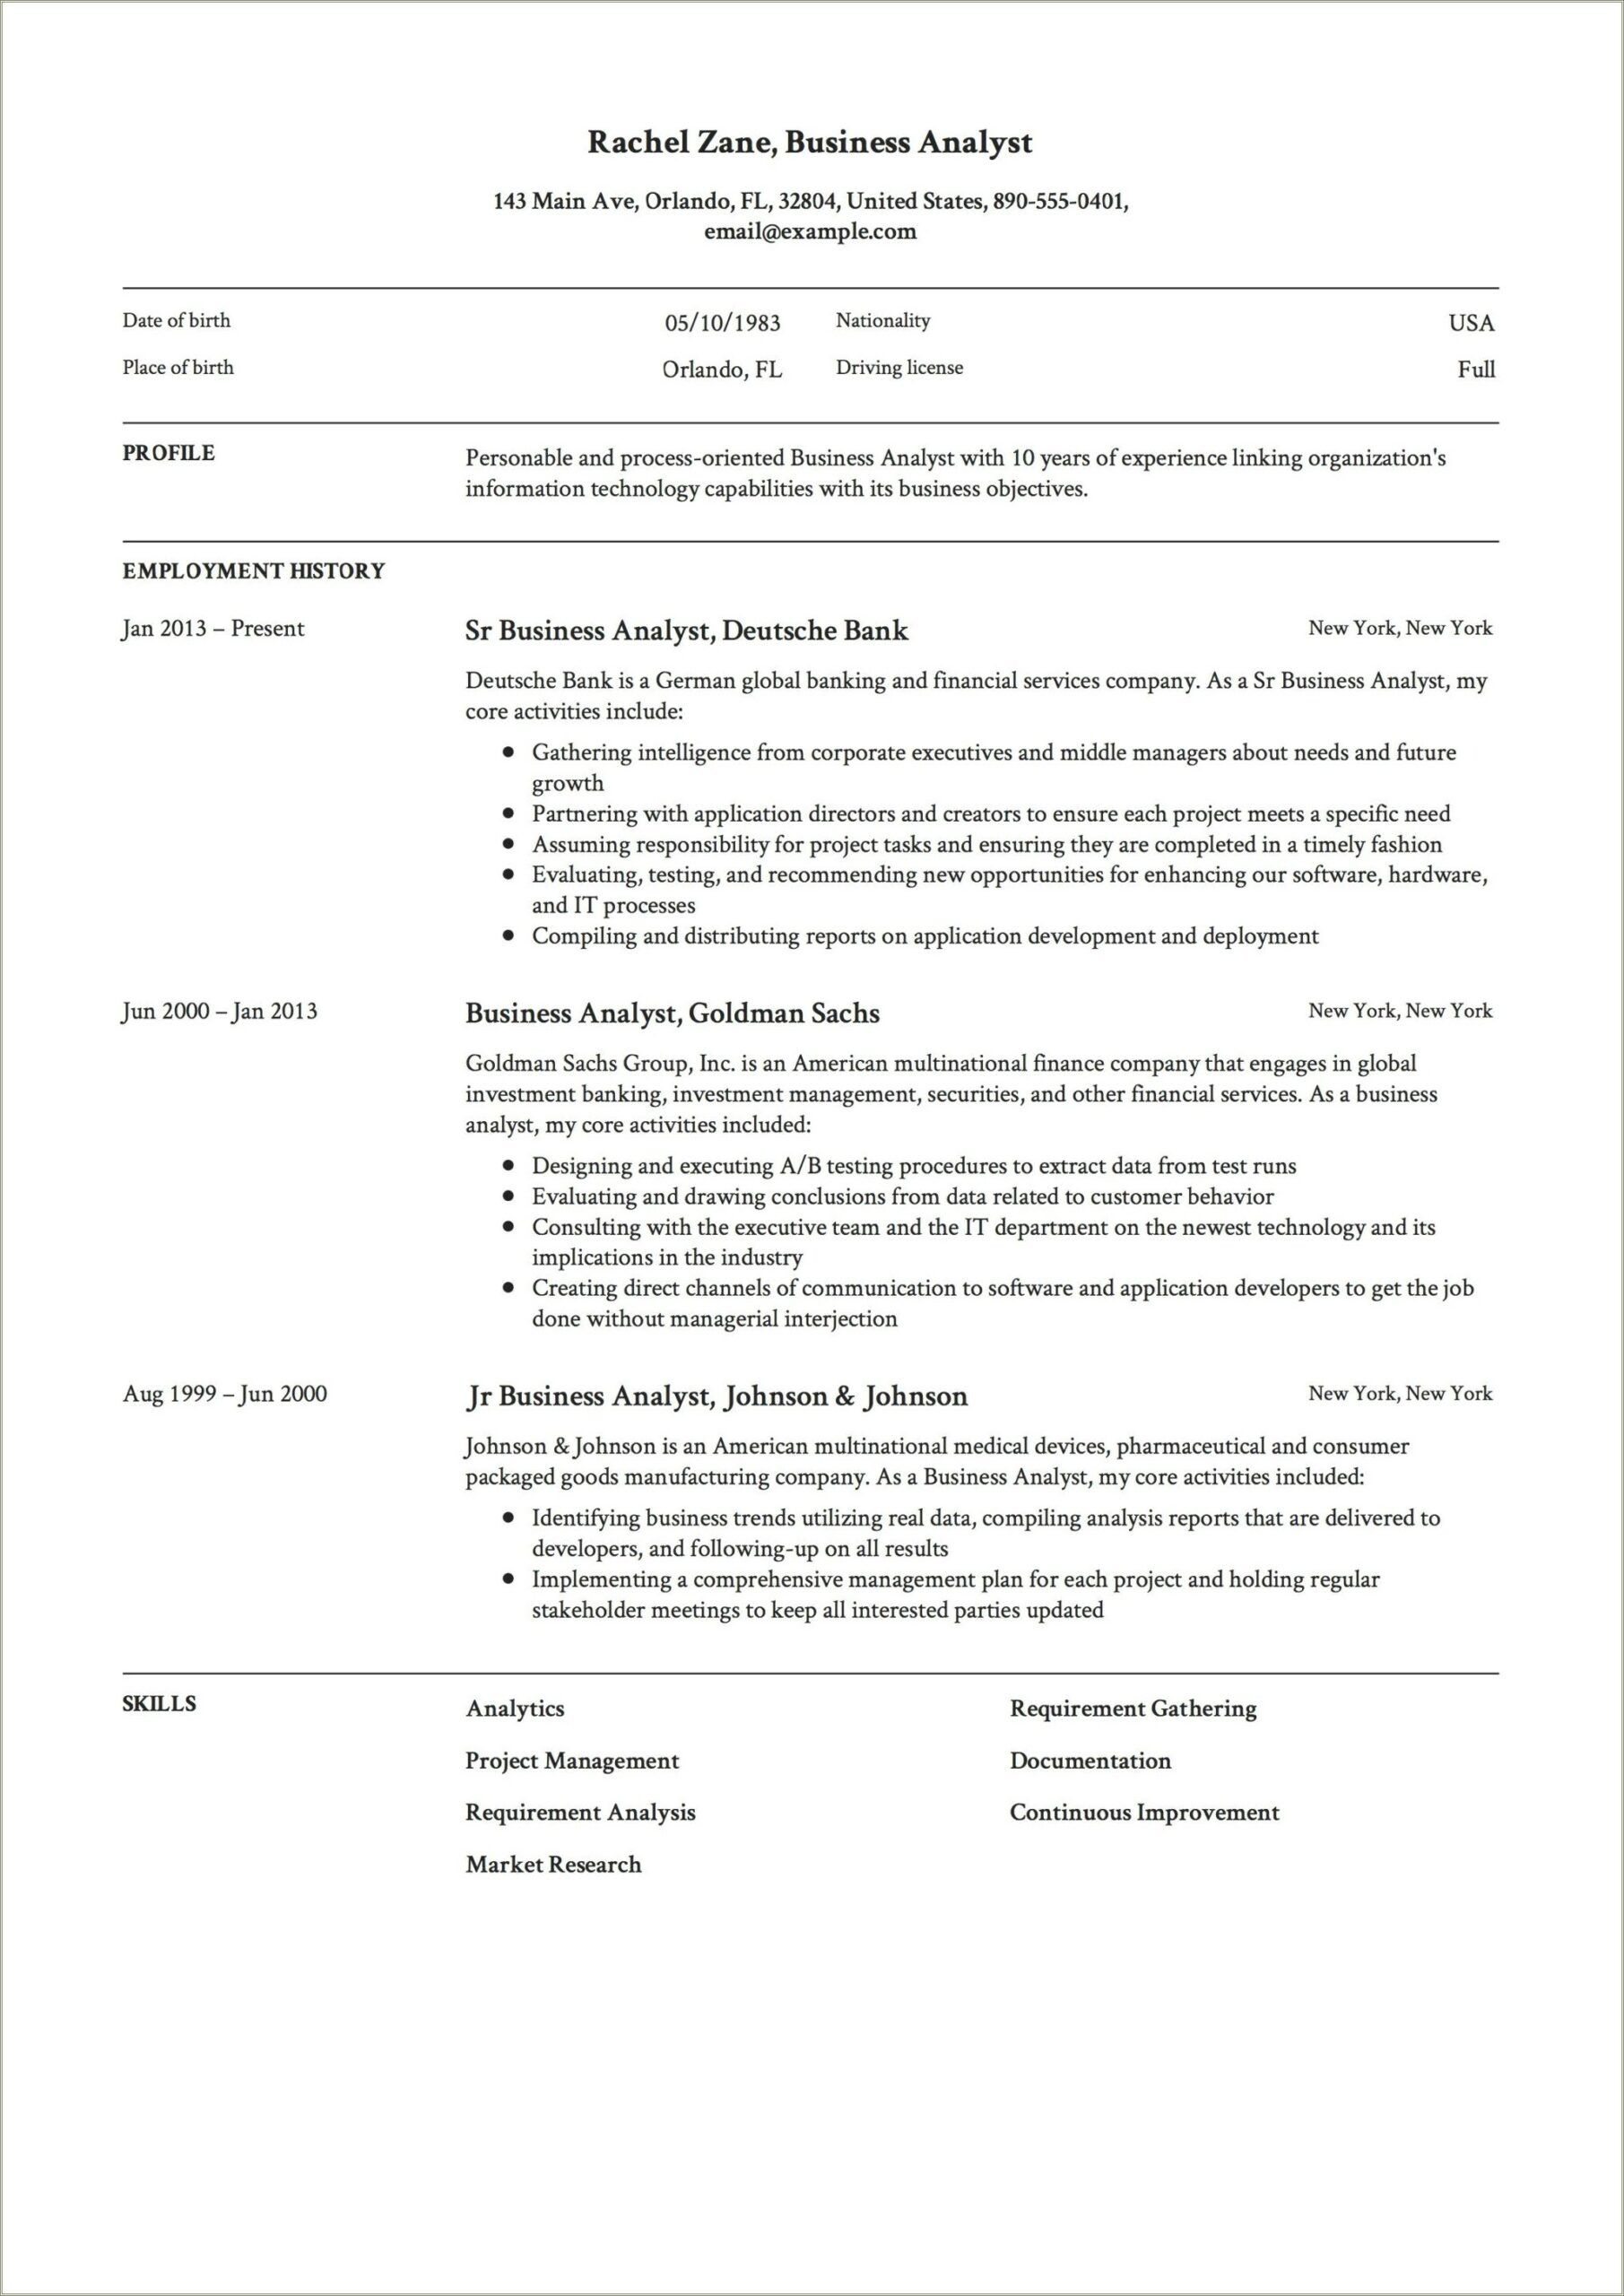 Examples Of Good Business Analyst Resumes